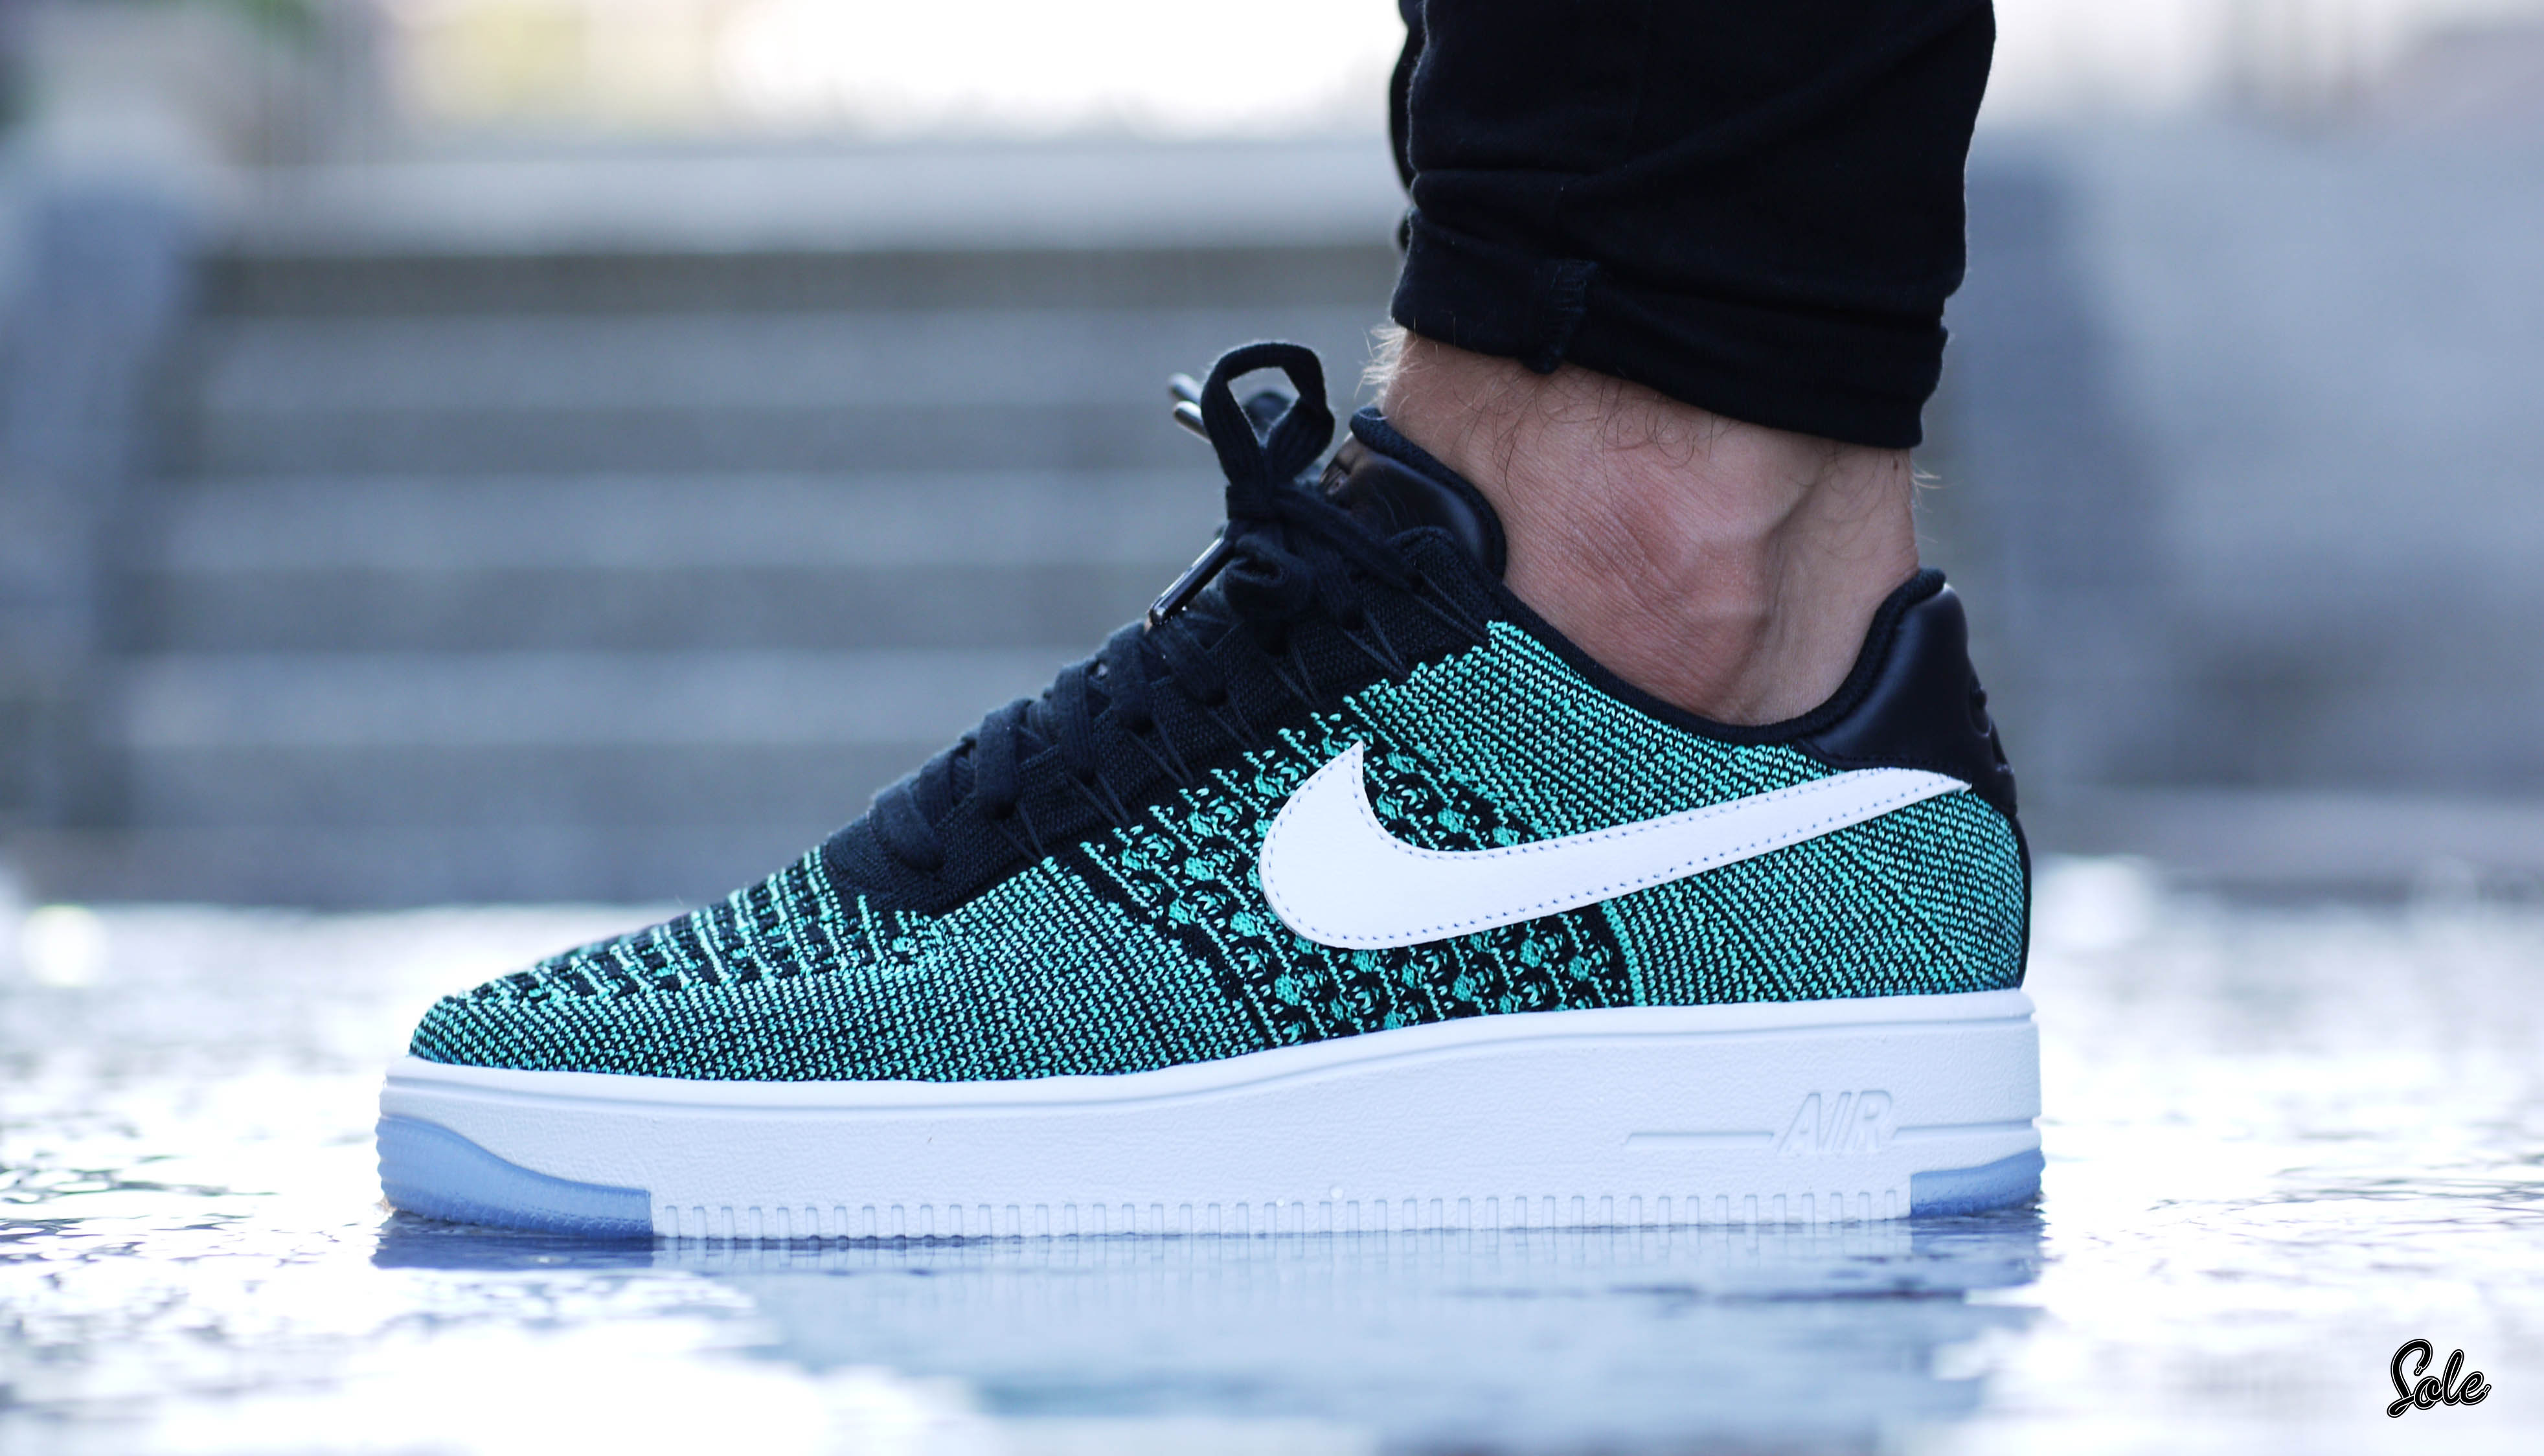 black and turquoise air force ones